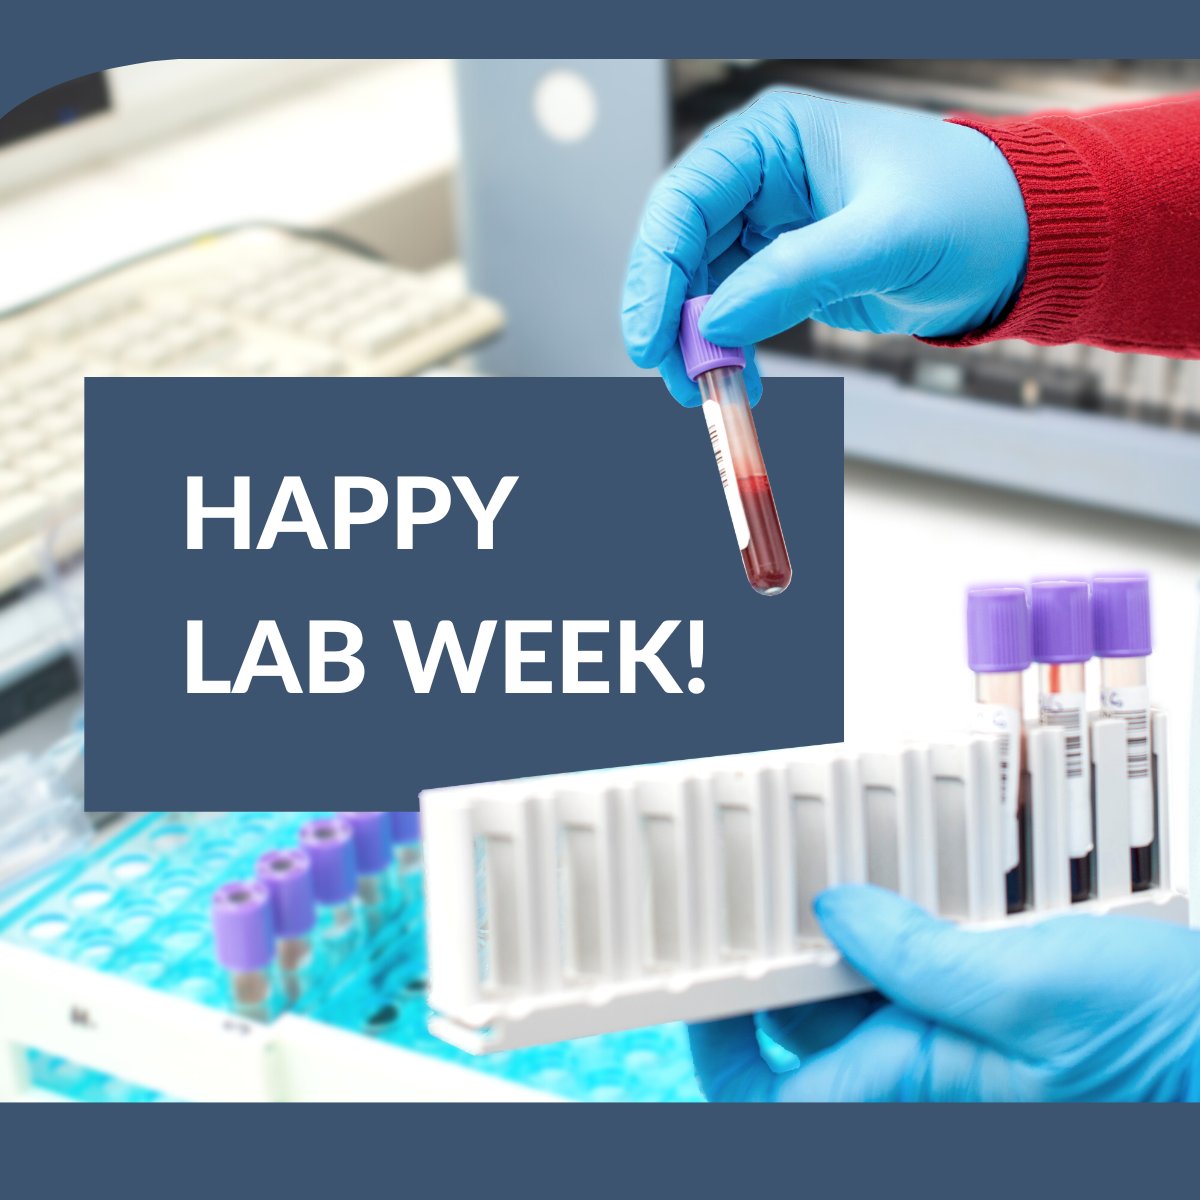 Happy Medical Laboratory Professionals #LabWeek!

Join us in celebrating the incredible dedication and contributions of lab professionals to patient care. We recognize their important role in informing evidence-based healthcare decisions.

 #LabWeek2023 #medicallaboratory